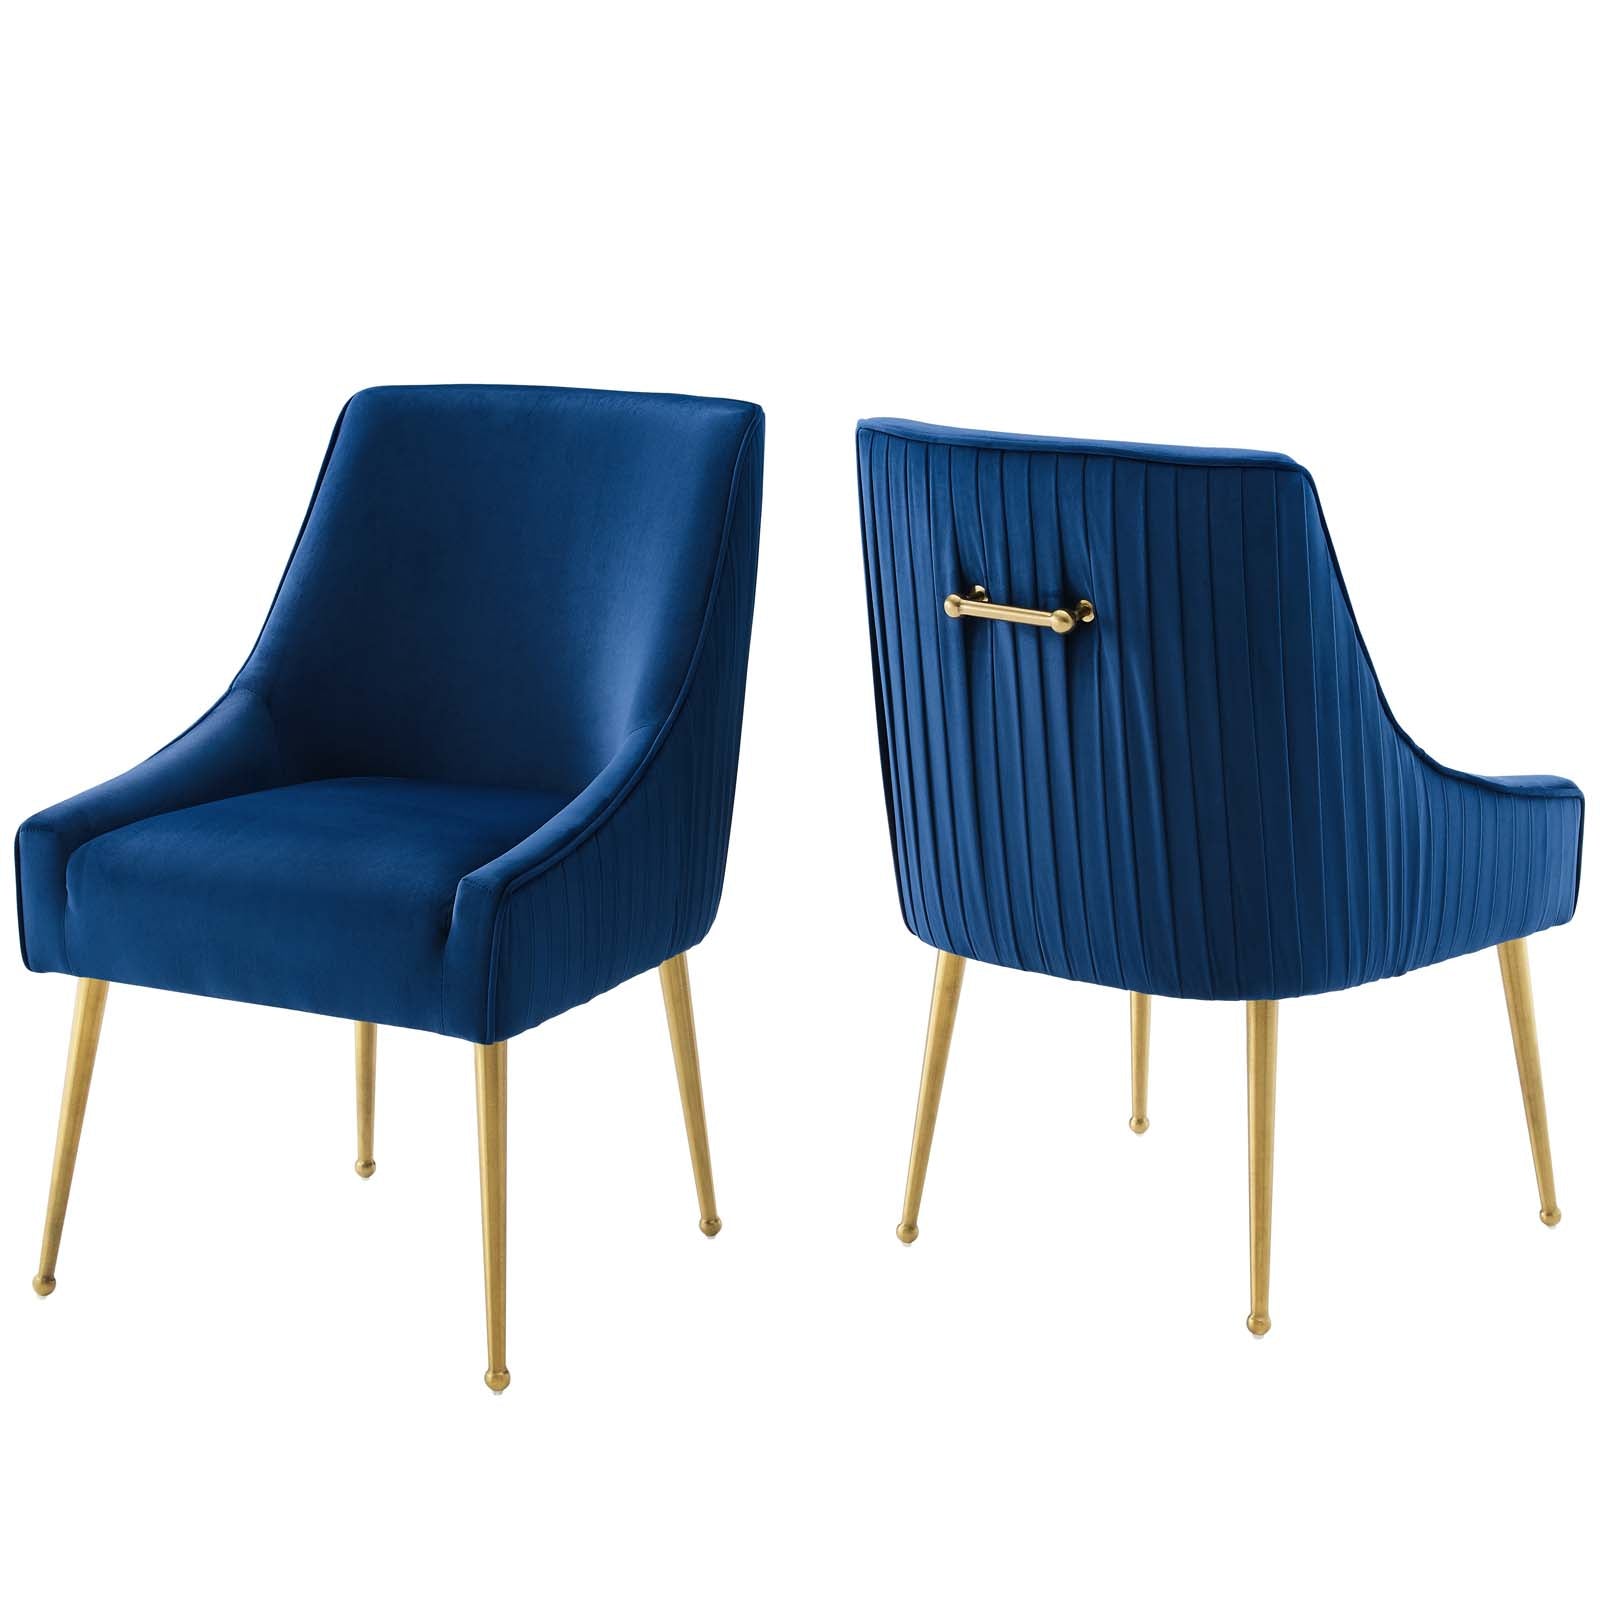 Discern Pleated Back Upholstered Performance Velvet Dining Chair Set of 2-Dining Chair-Modway-Wall2Wall Furnishings